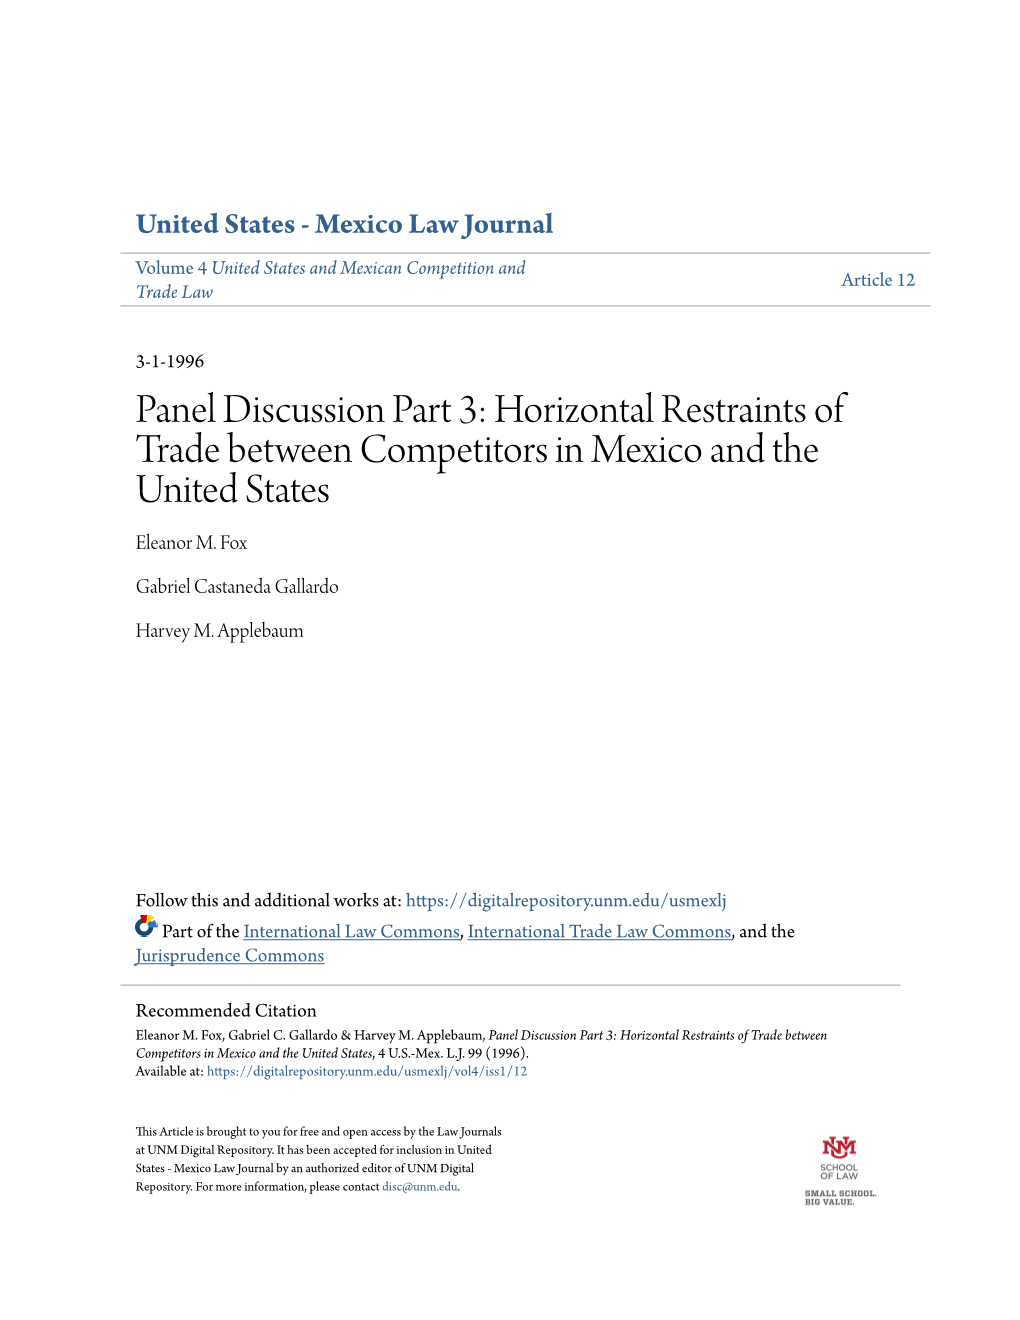 Horizontal Restraints of Trade Between Competitors in Mexico and the United States Eleanor M